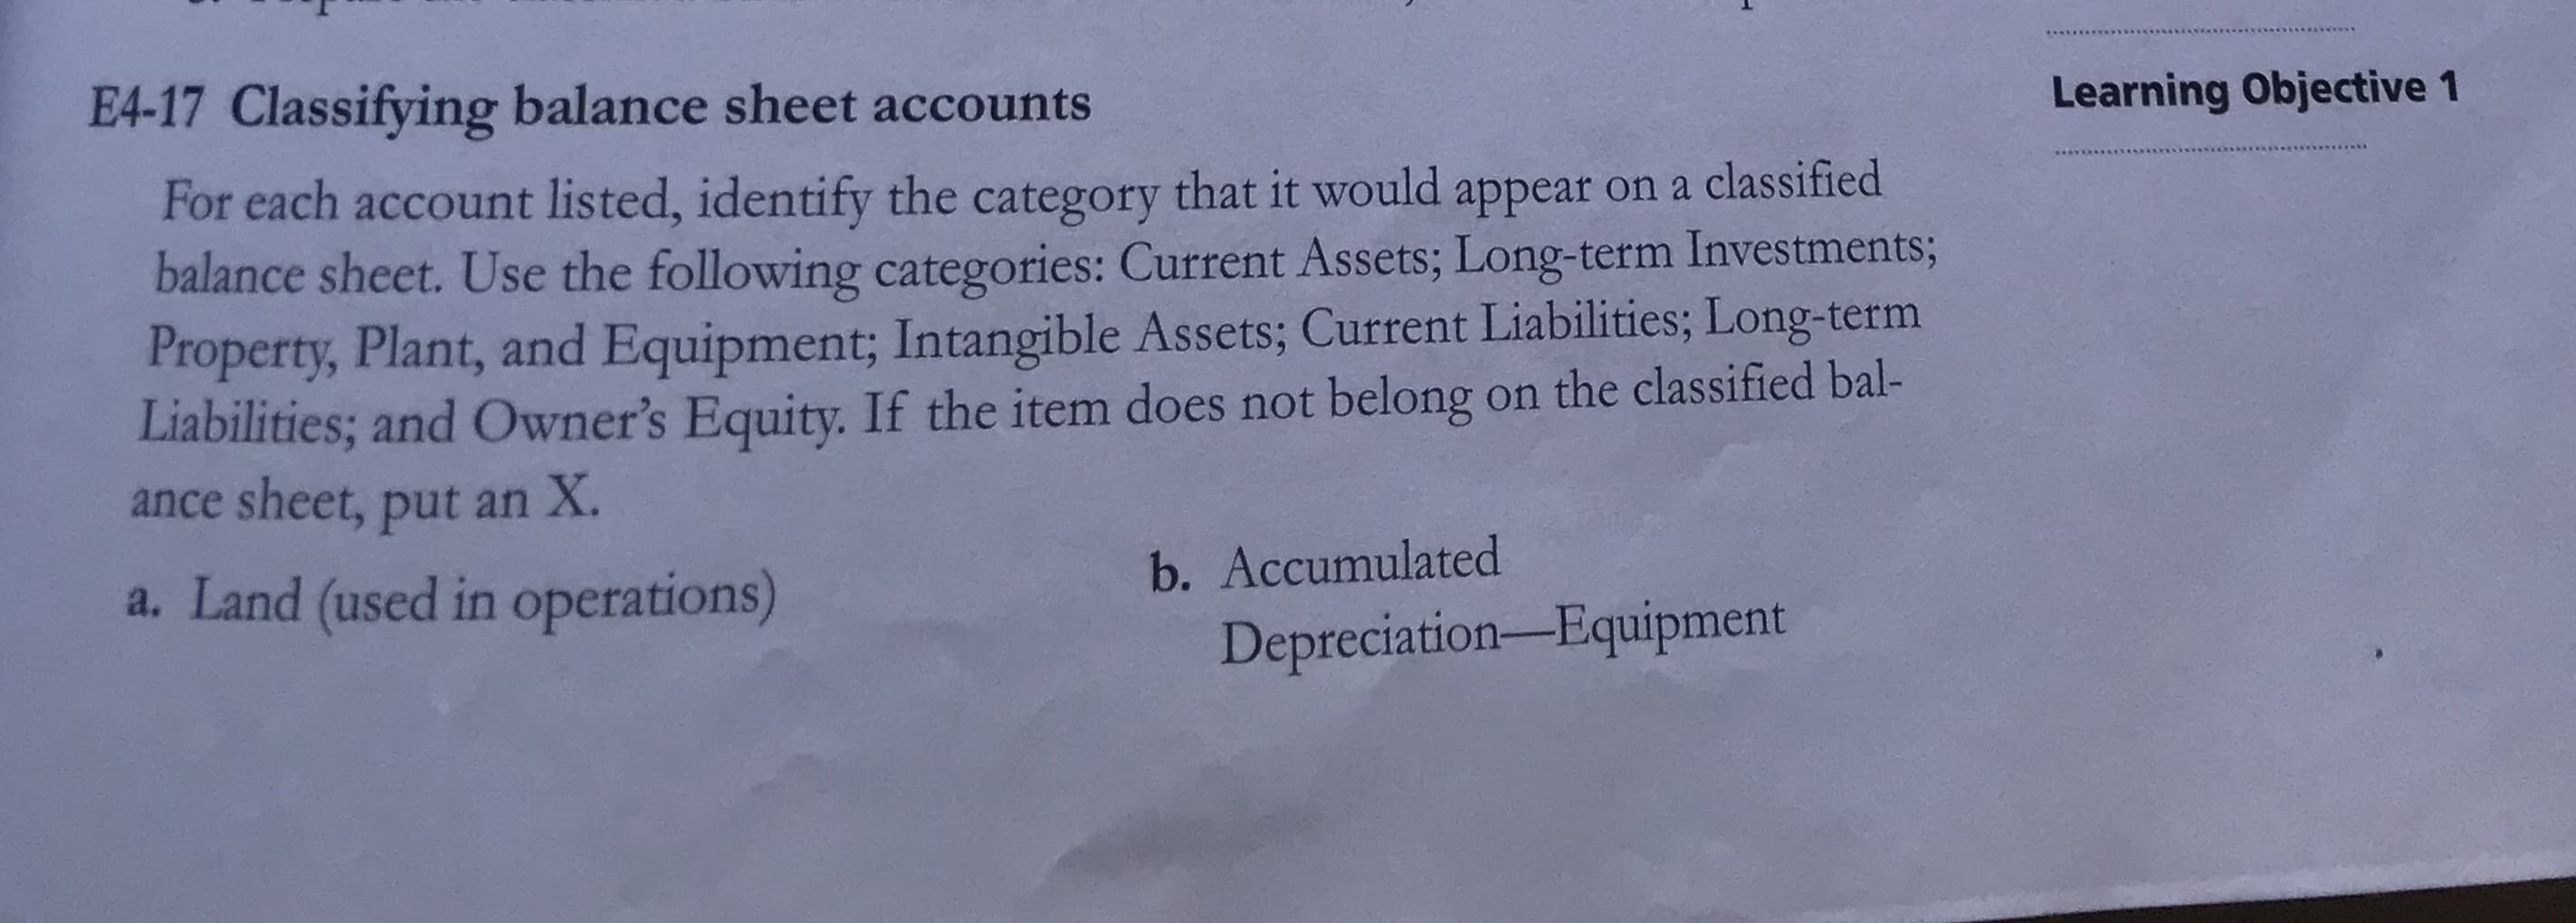 For each account listed, identify the category that it would appear on a classified
balance sheet. Use the following categories: Current Assets; Long-term Investments;
Property, Plant, and Equipment; Intangible Assets; Current Liabilities; Long-term
Liabilities; and Owner's Equity. If the item does not belong on the classified bal-
ance sheet, put an X.
